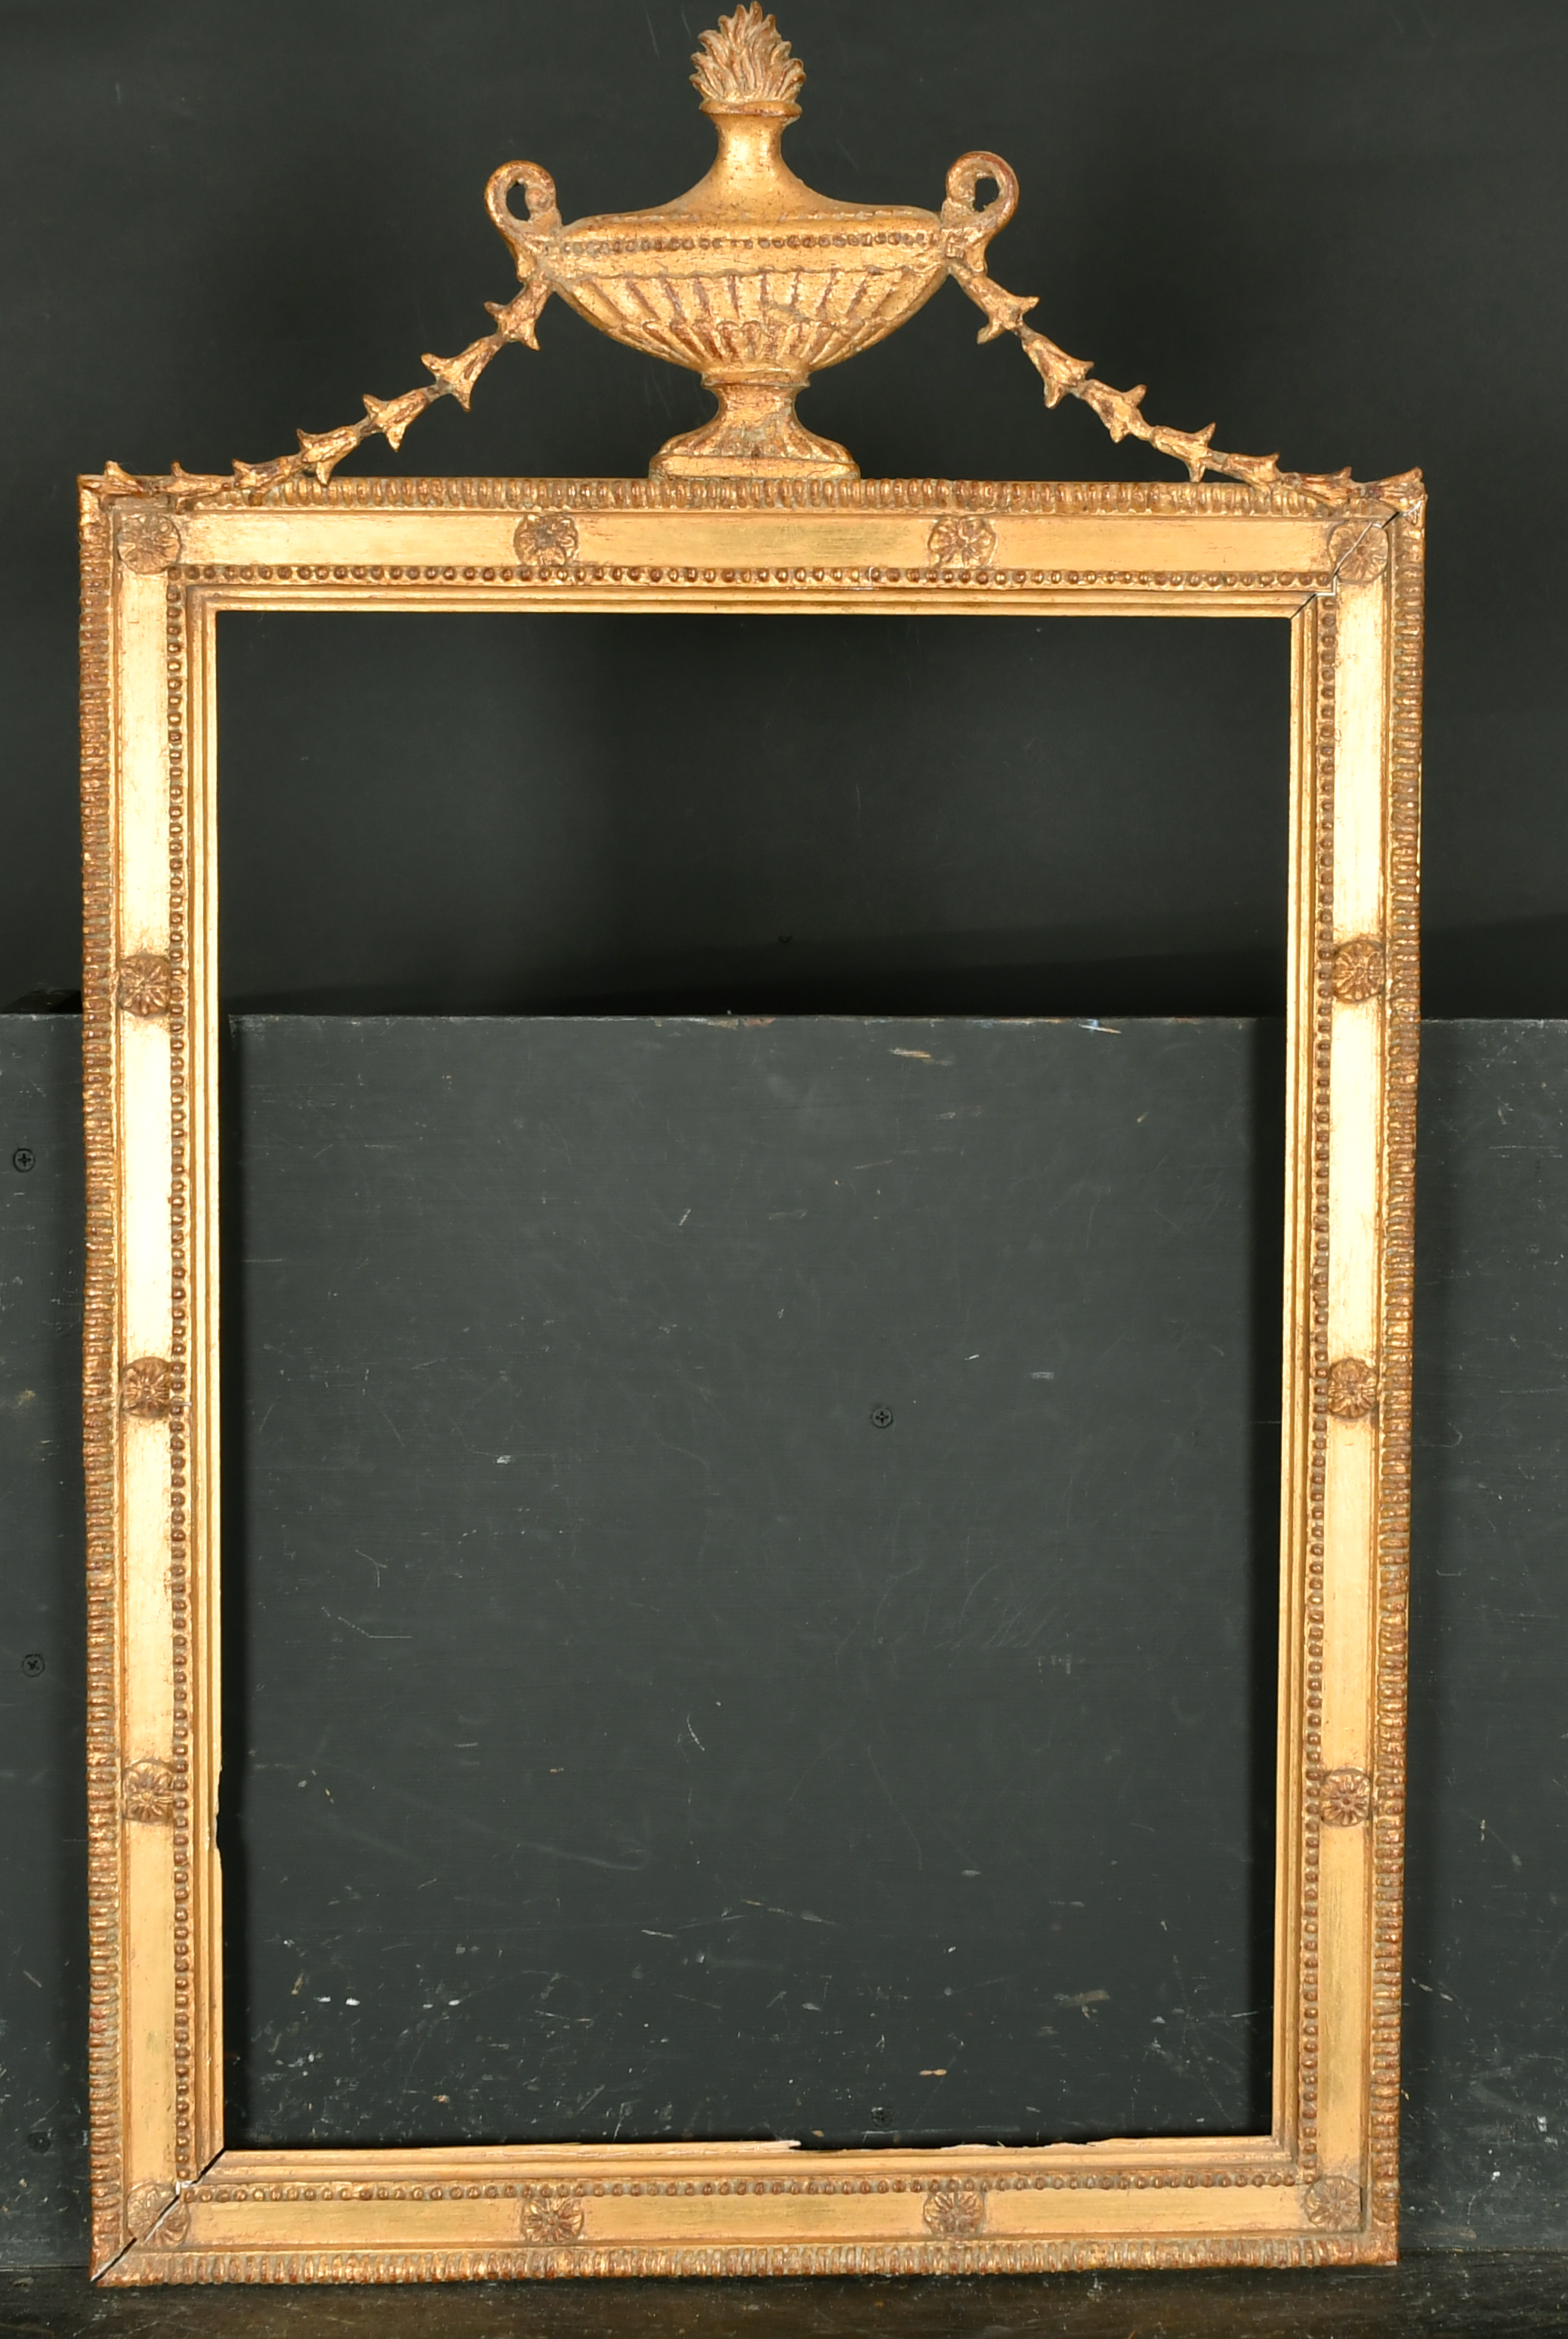 20th Century English School. A Gilt Composition frame, with an ornate top with an urn, rebate 23.25" - Image 2 of 3